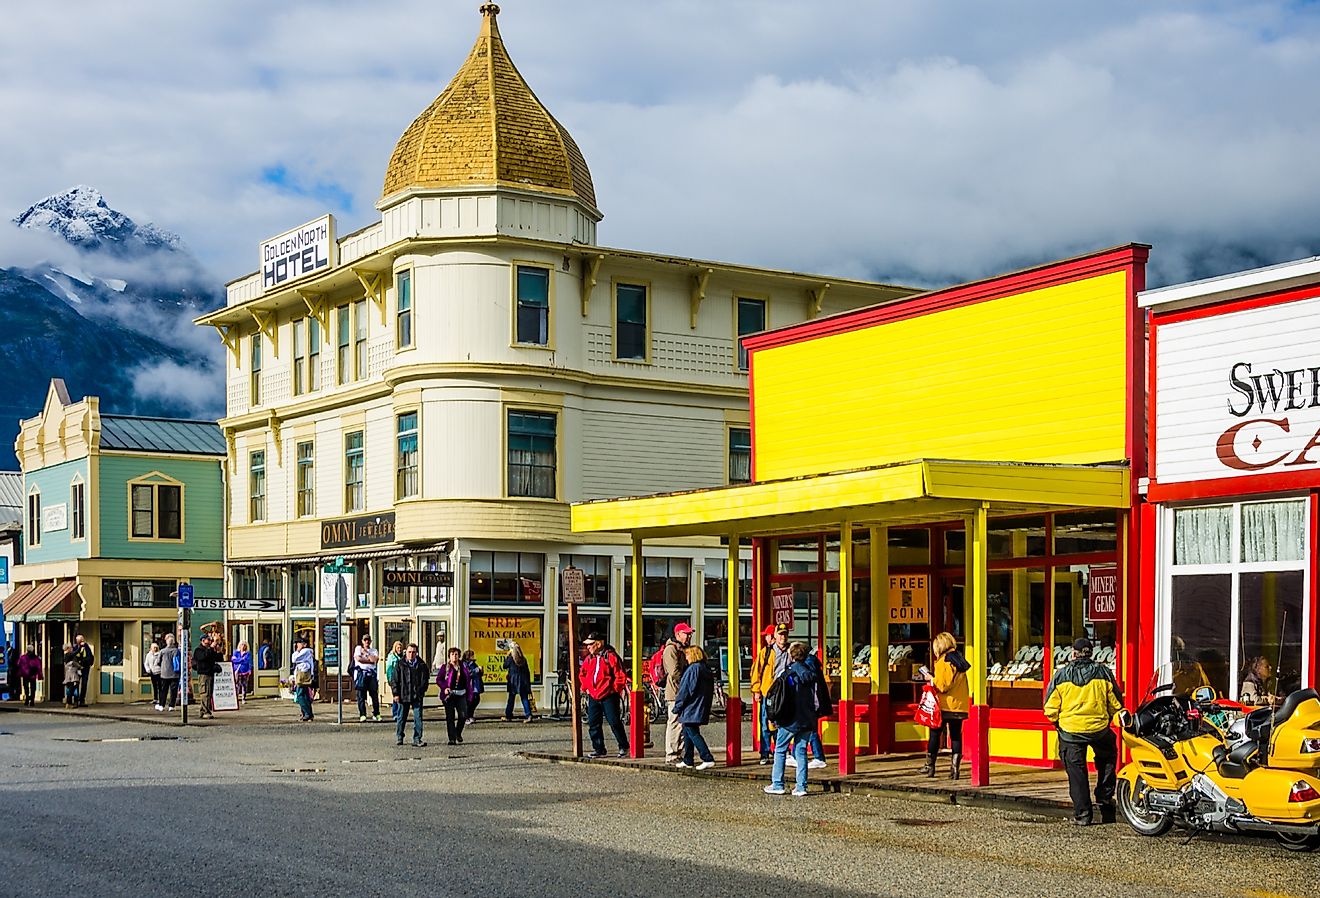 Skagway, Alaska, colorful storefronts line the street in the downtown. Image credit lembi via Shutterstock